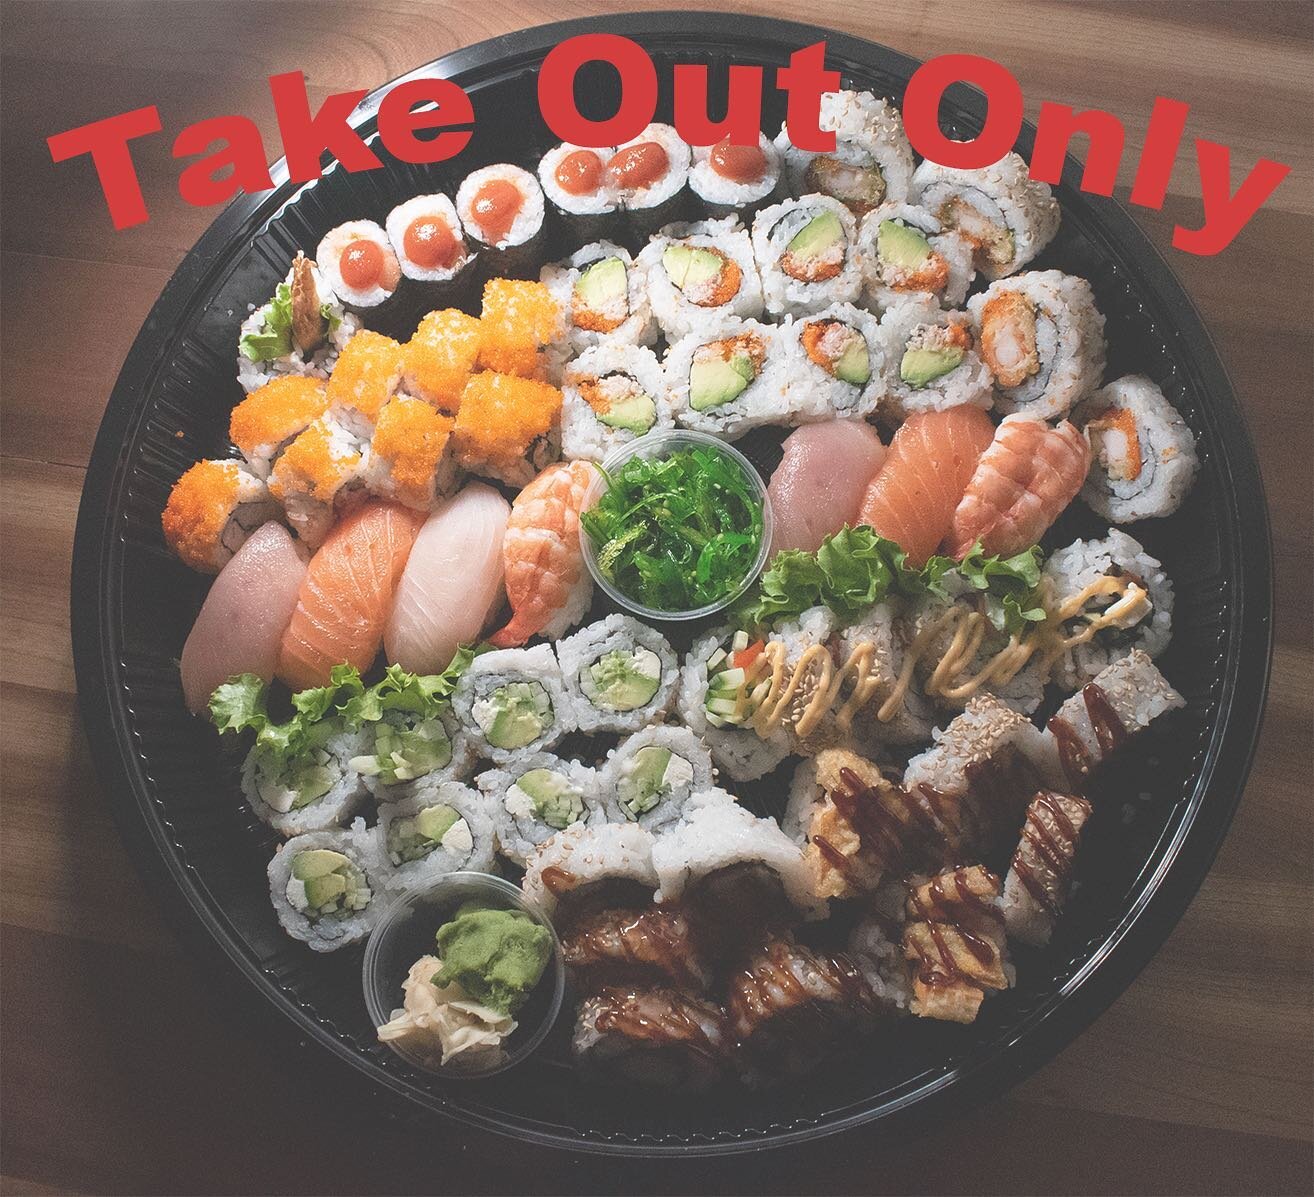 In accordance with provincial guidelines, Sushi Daruma is operating in a take out only capacity effective November 2nd. We would like to thank all our patrons and staff for their continued support, during these challenging times. We look forward to w